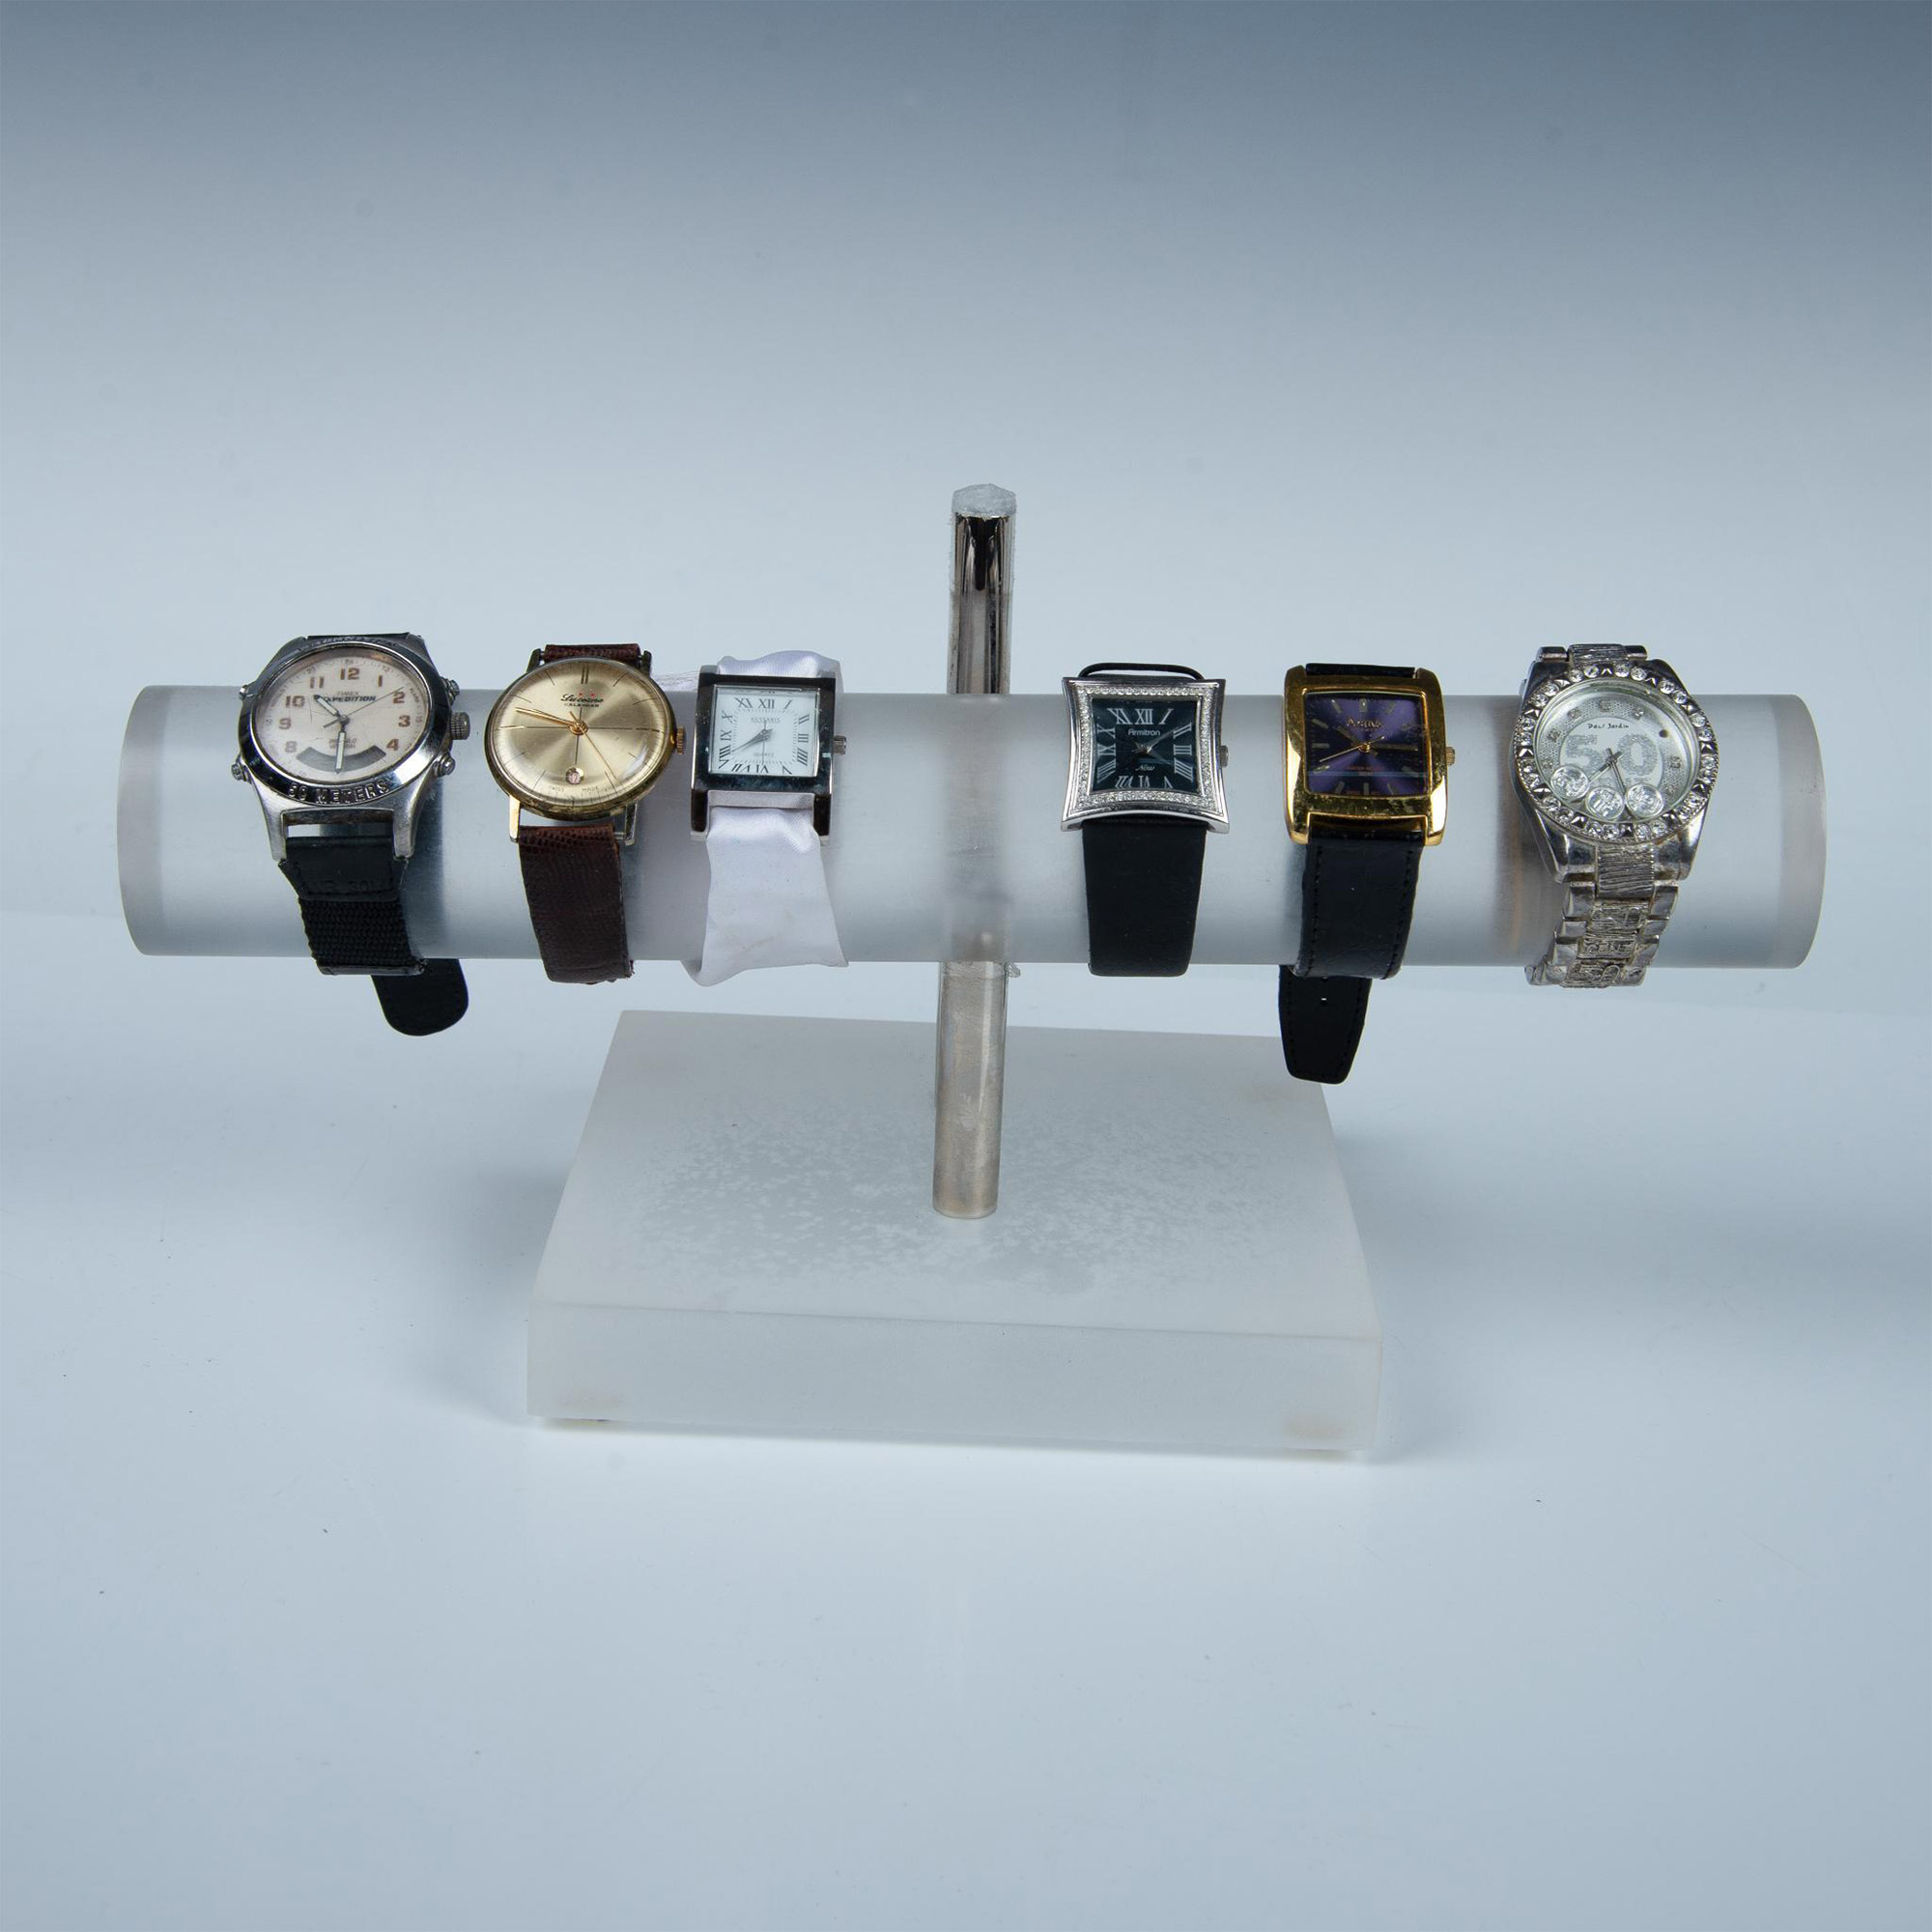 6pc Wristwatch Grouping, 5 Men's and 1 Ladies